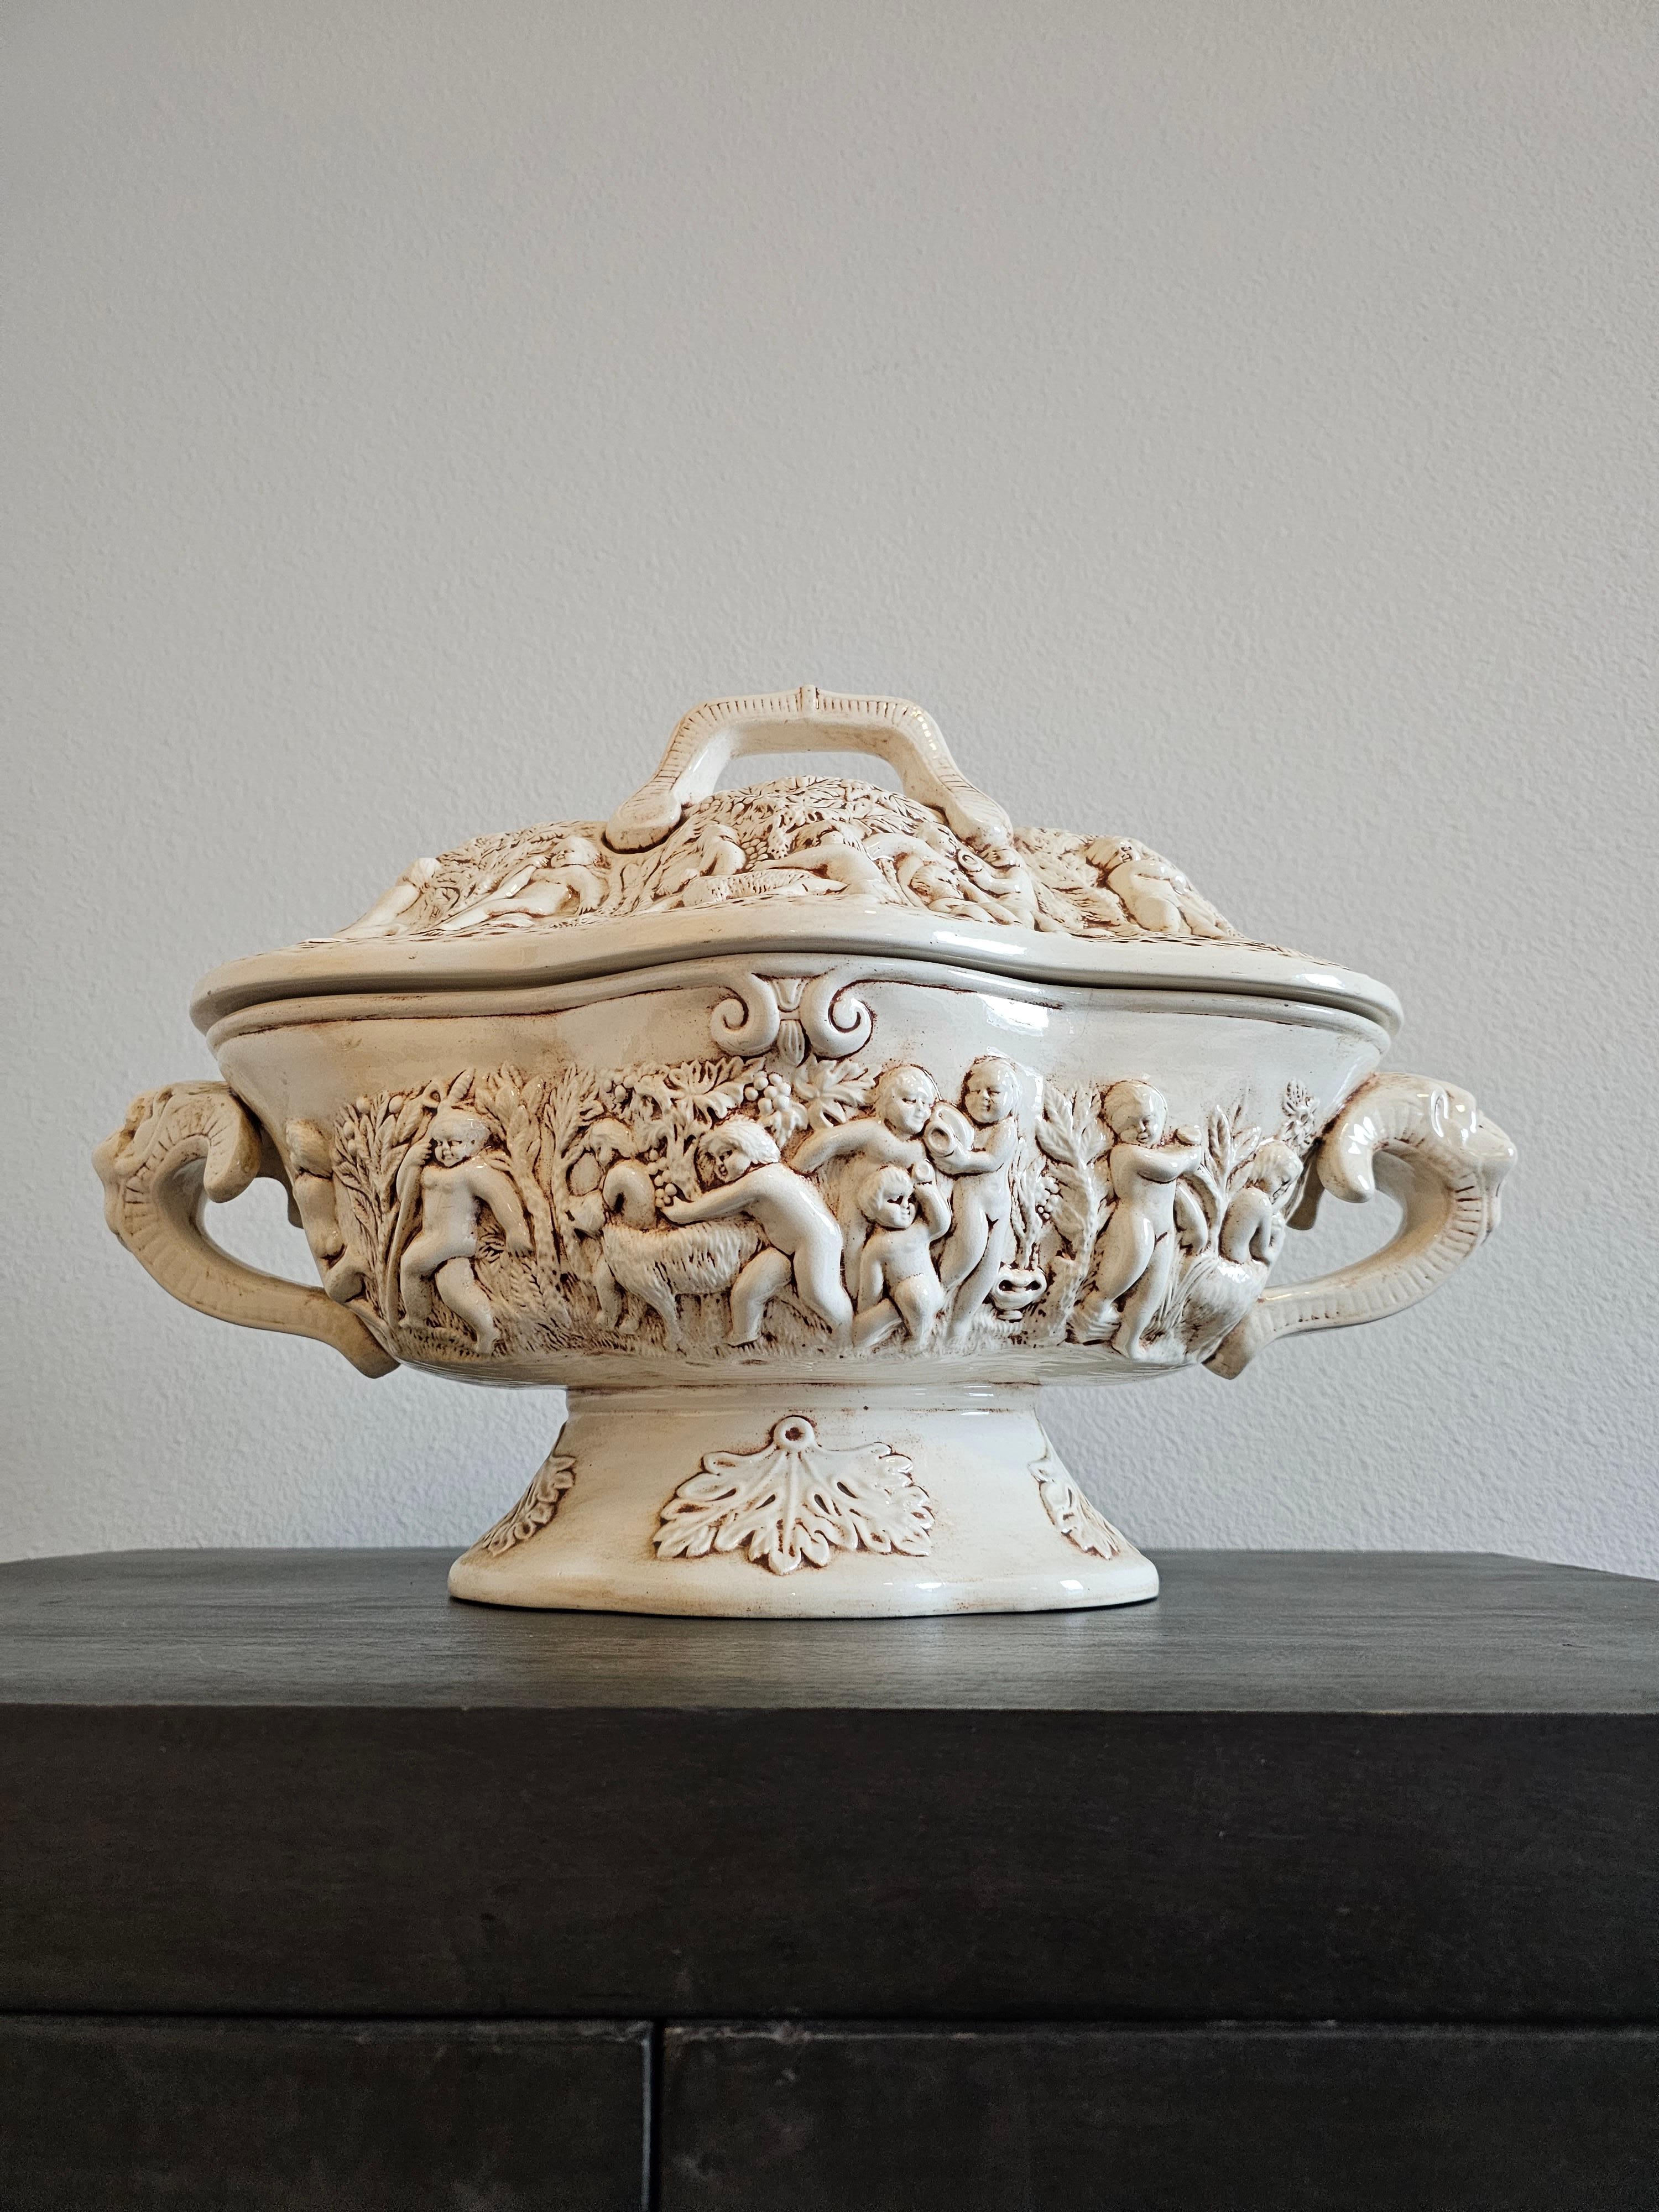 Vintage Italian Capodimonte Porcelain Covered Serving Dish Large Soup Tureen For Sale 7